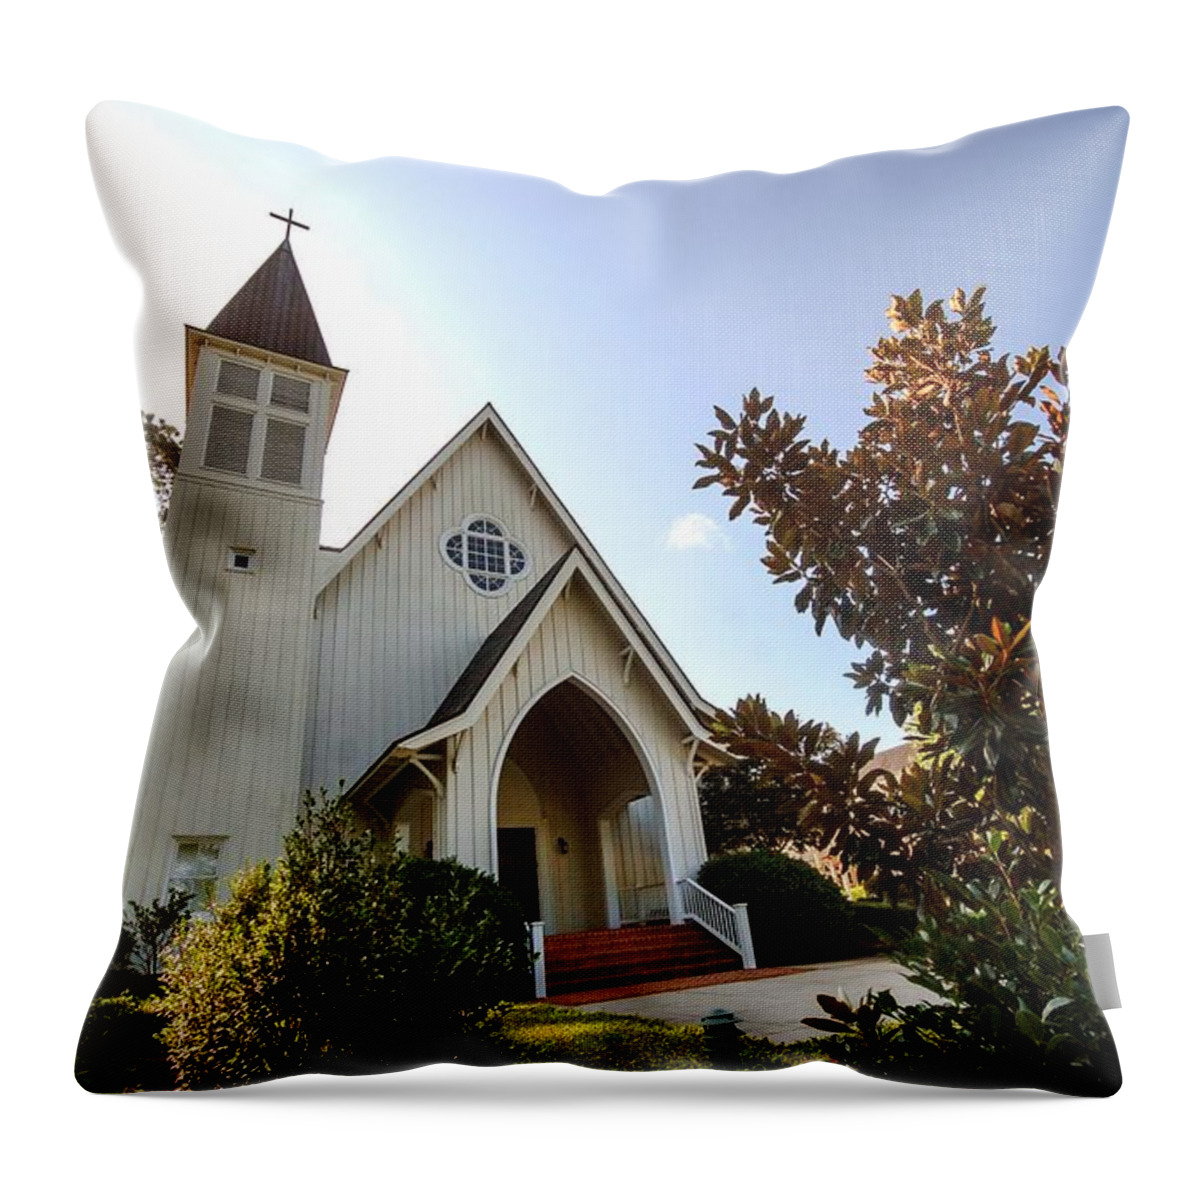  Throw Pillow featuring the photograph St. James v4 Fairhope AL by Michael Thomas